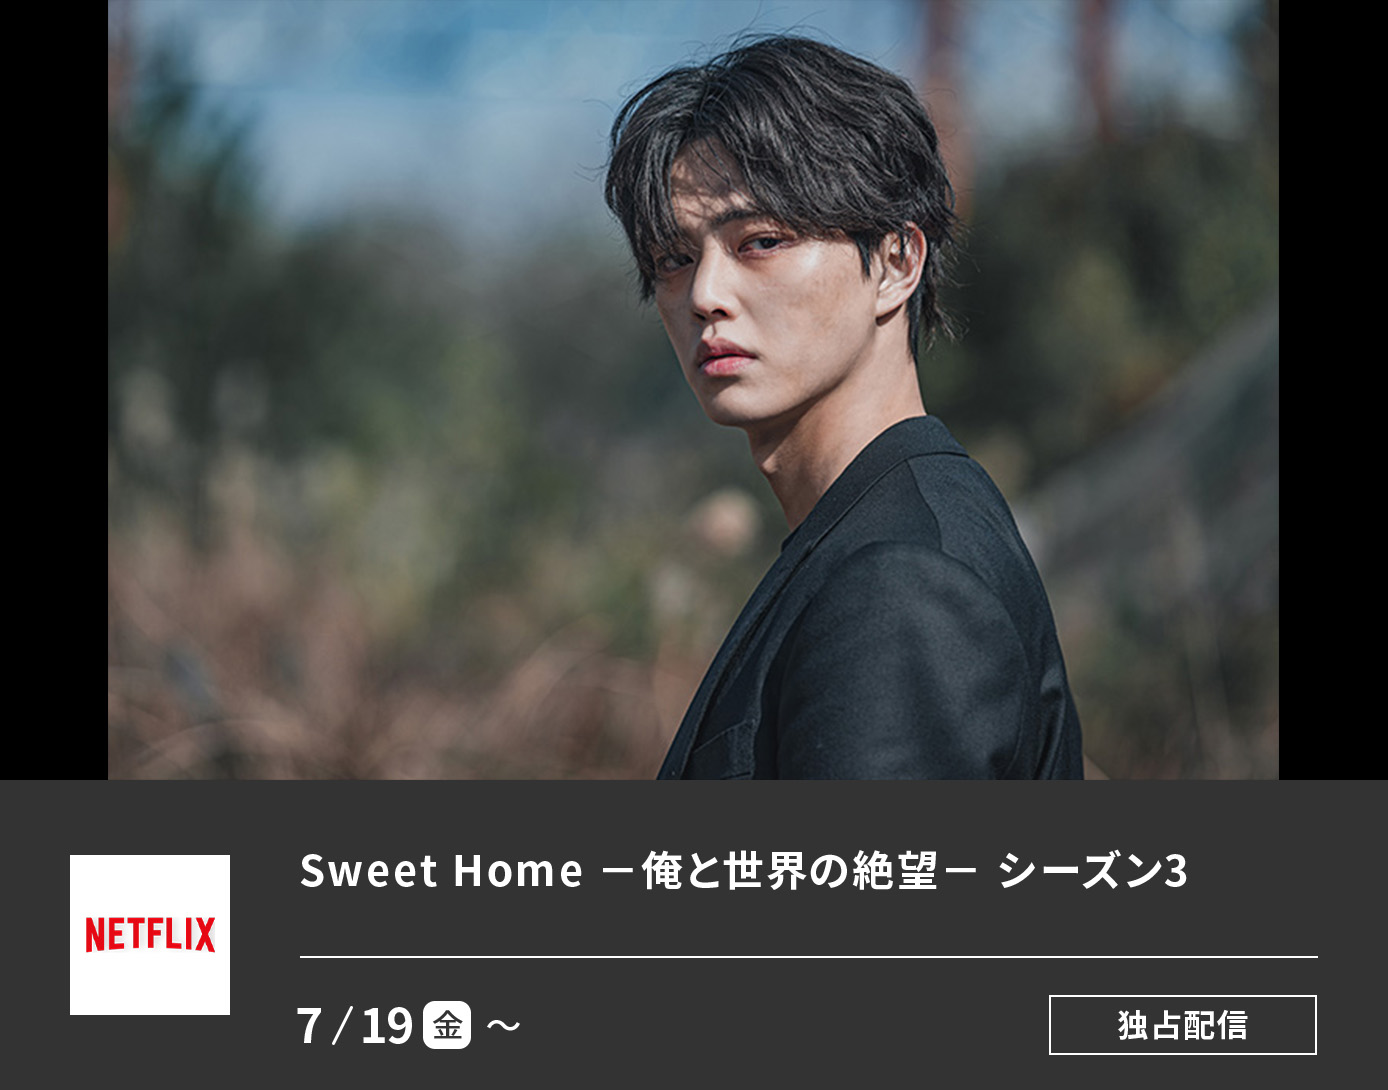 Sweet Home －俺と世界の絶望－: シーズン3